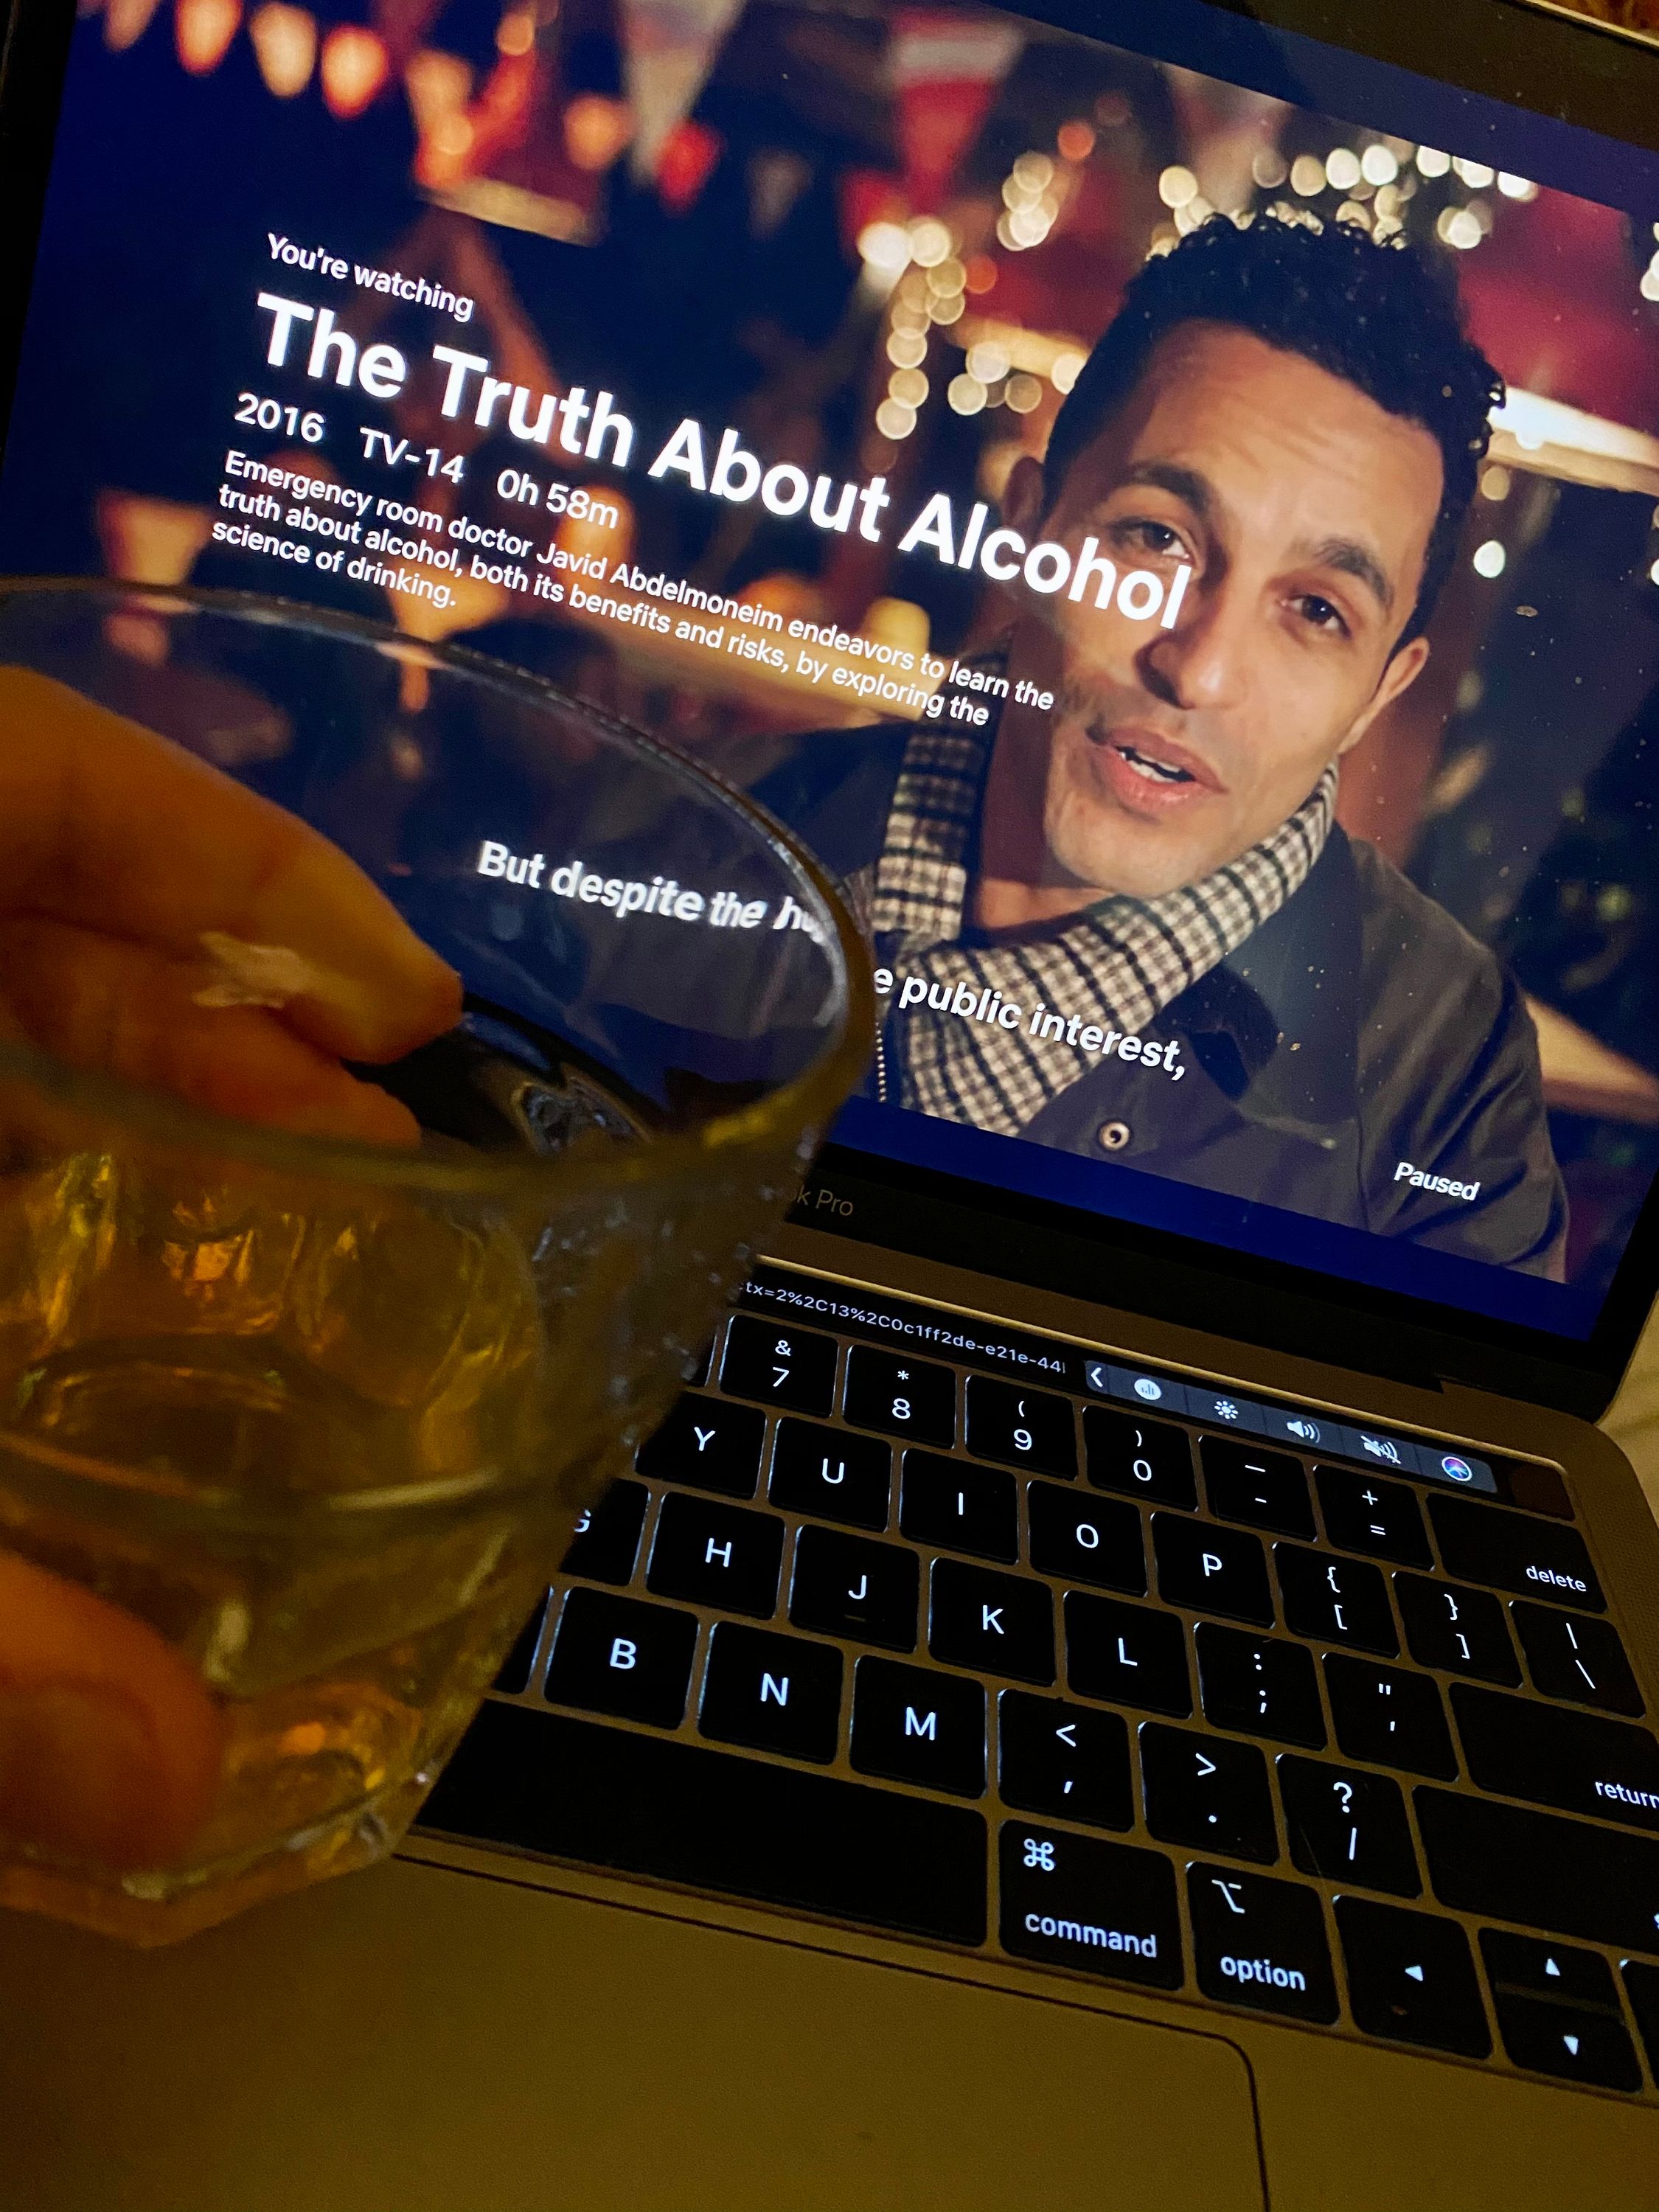 Watching the documentary while sipping Elijah Craig bourbon